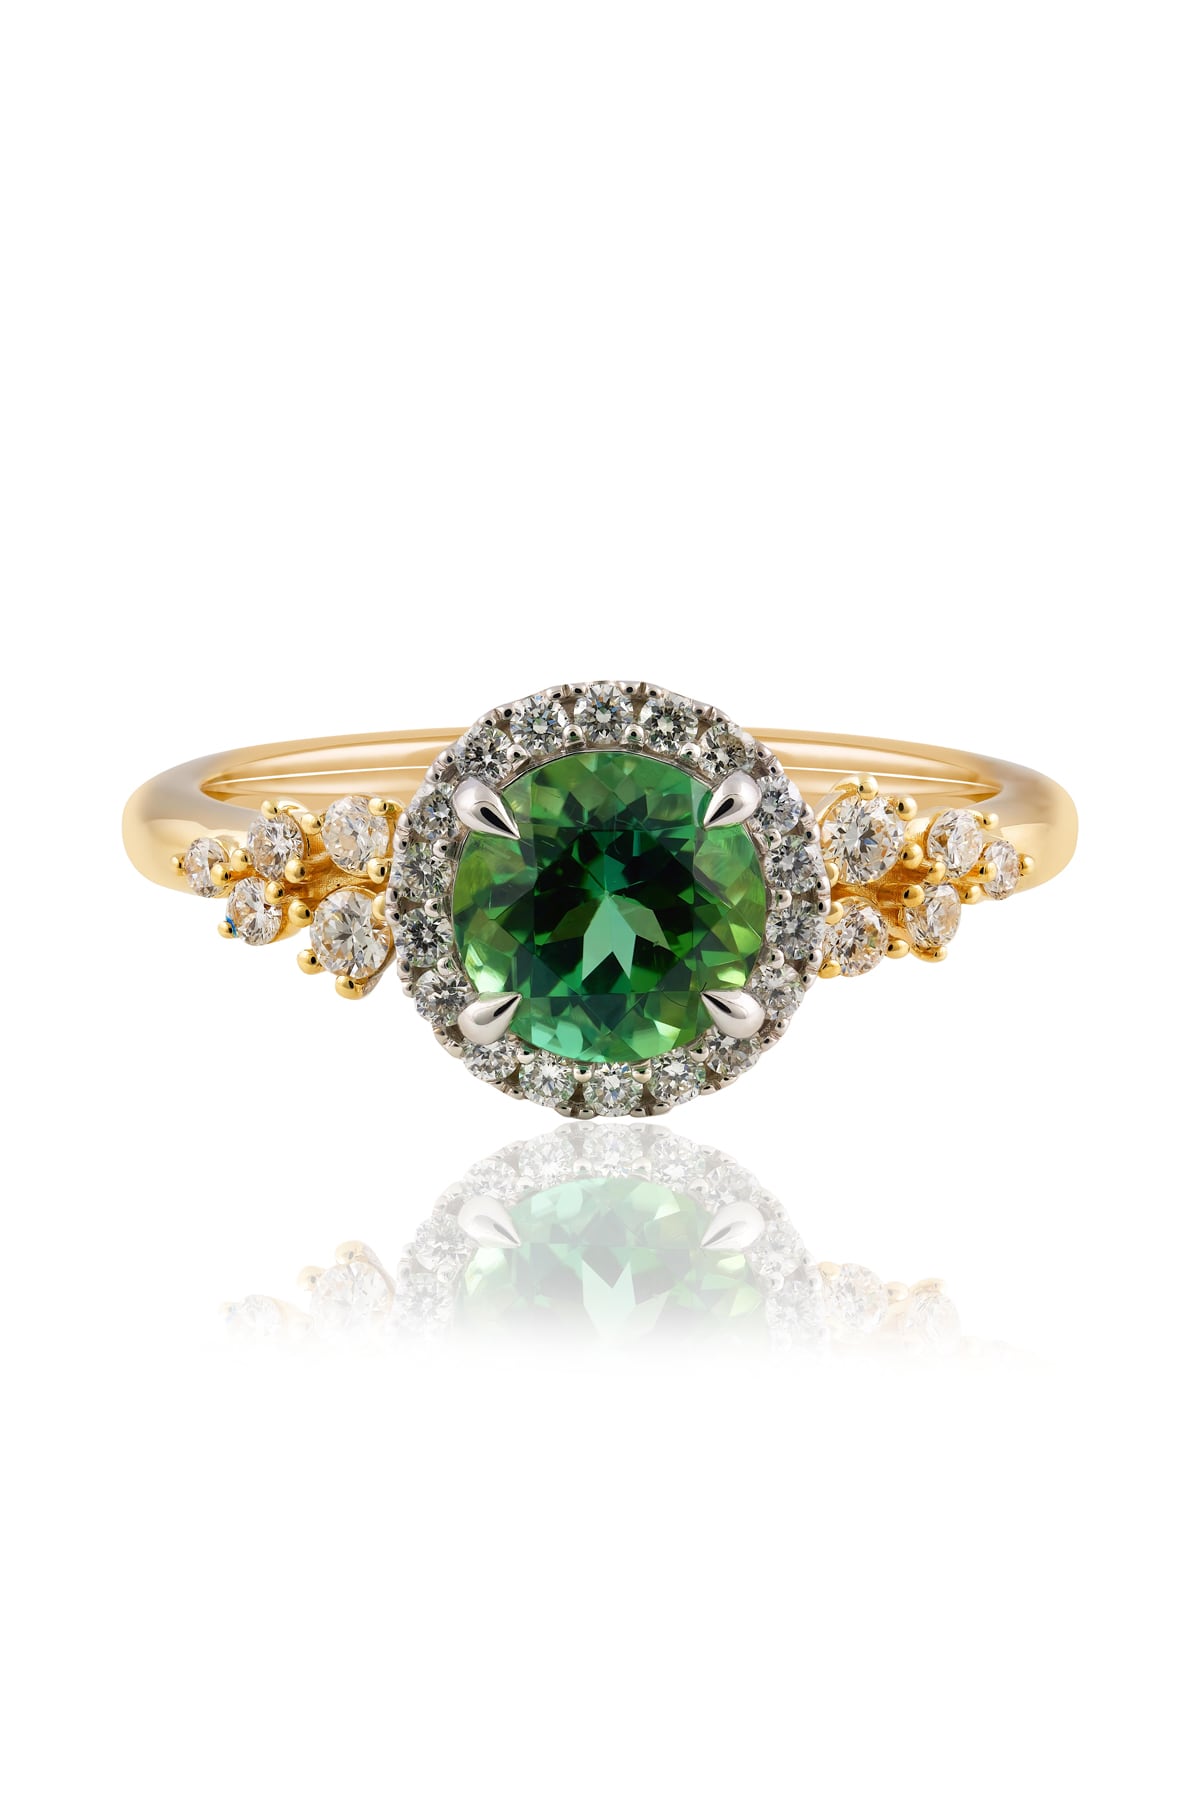 Mint Tourmaline And Diamond Ring In Yellow And White Gold from LeGassick Jewellers.